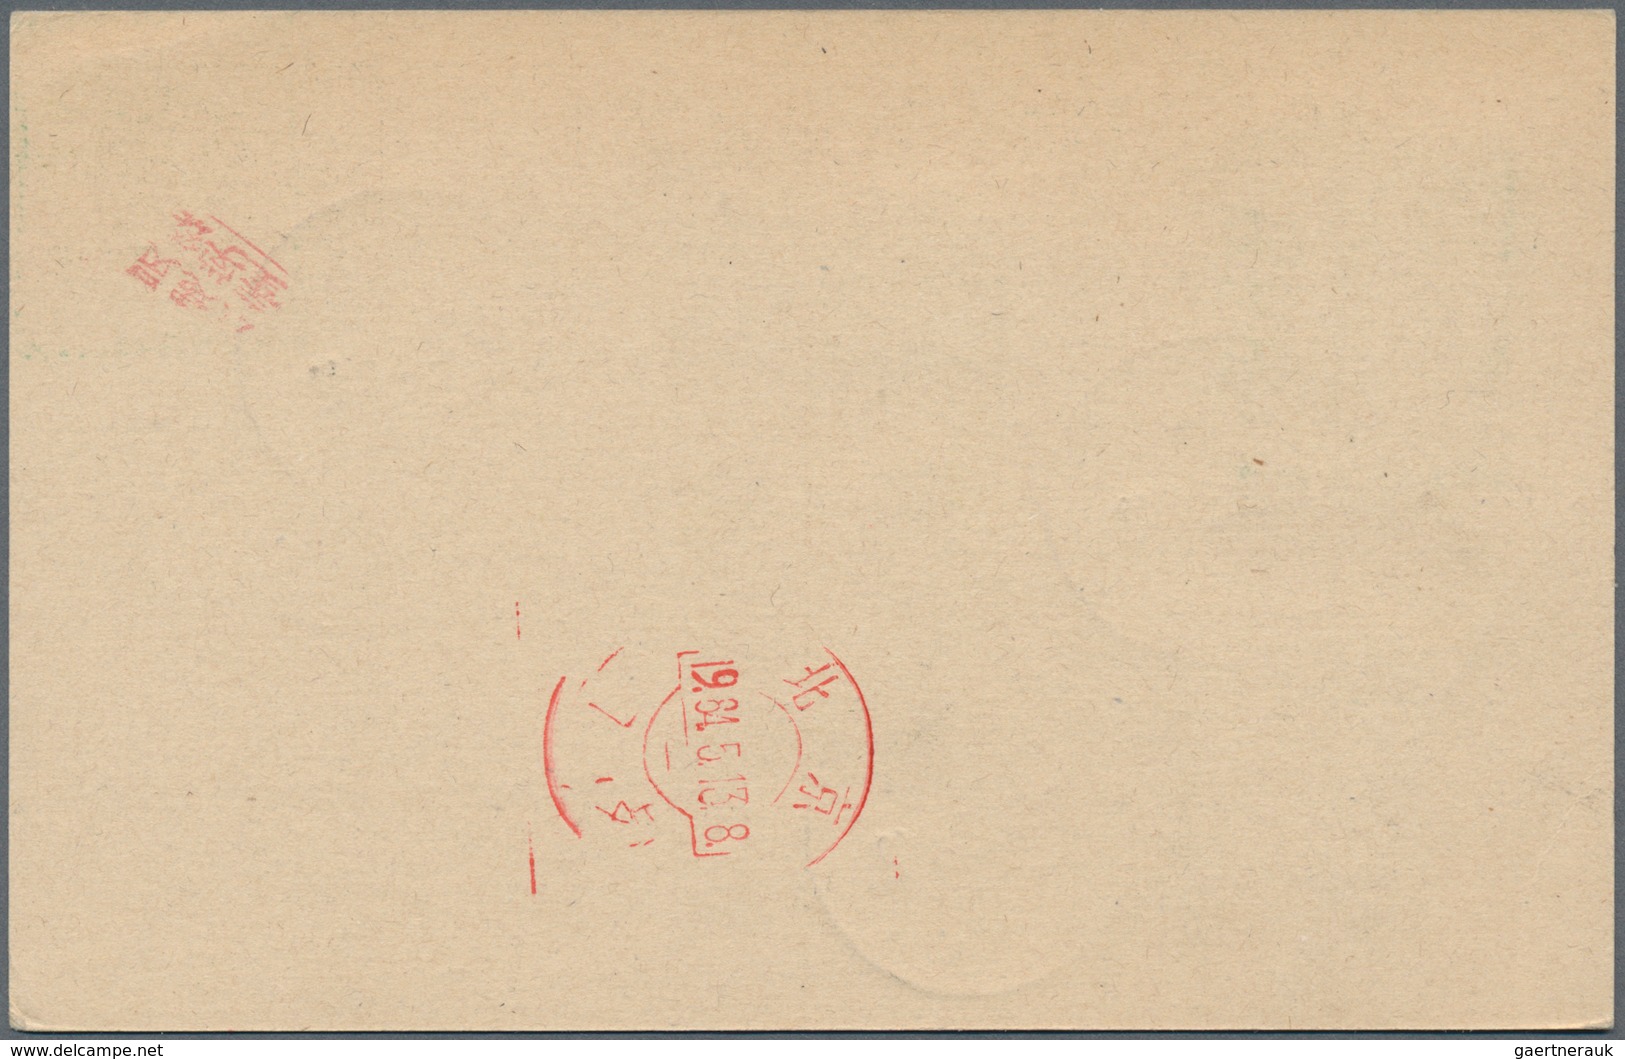 China - Volksrepublik - Ganzsachen: 1977/81, Used In Tibet, To Peking: Card 2 F. Uprated 2 F. (7-197 - Postales